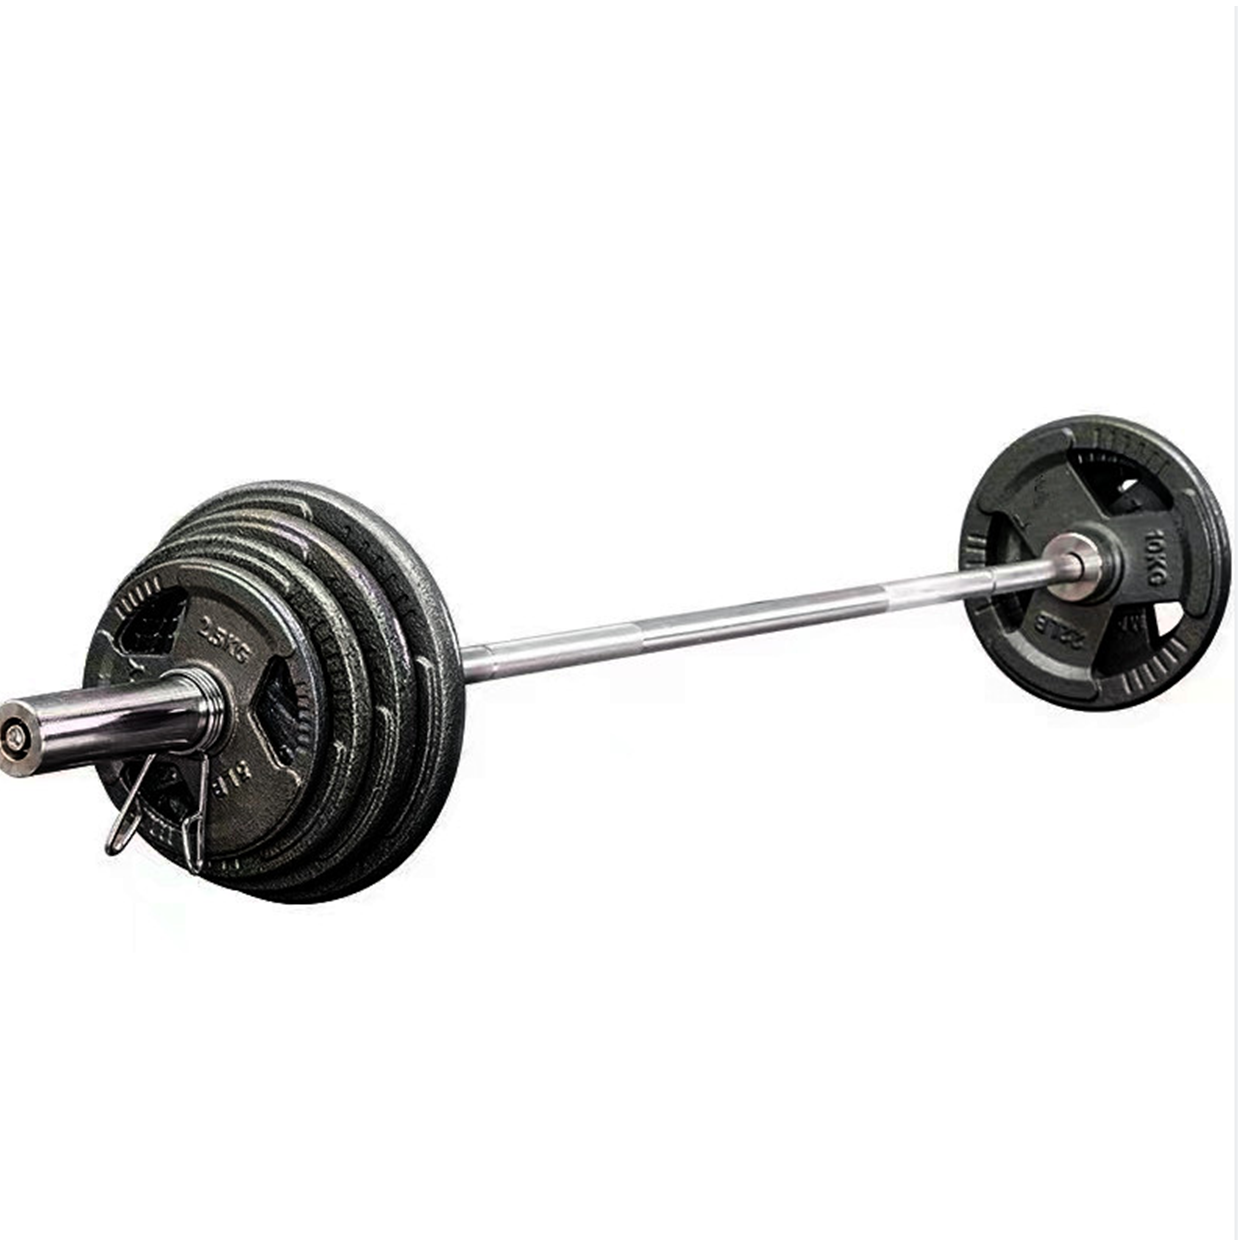 90KG Weights Set and 15KG Barbell